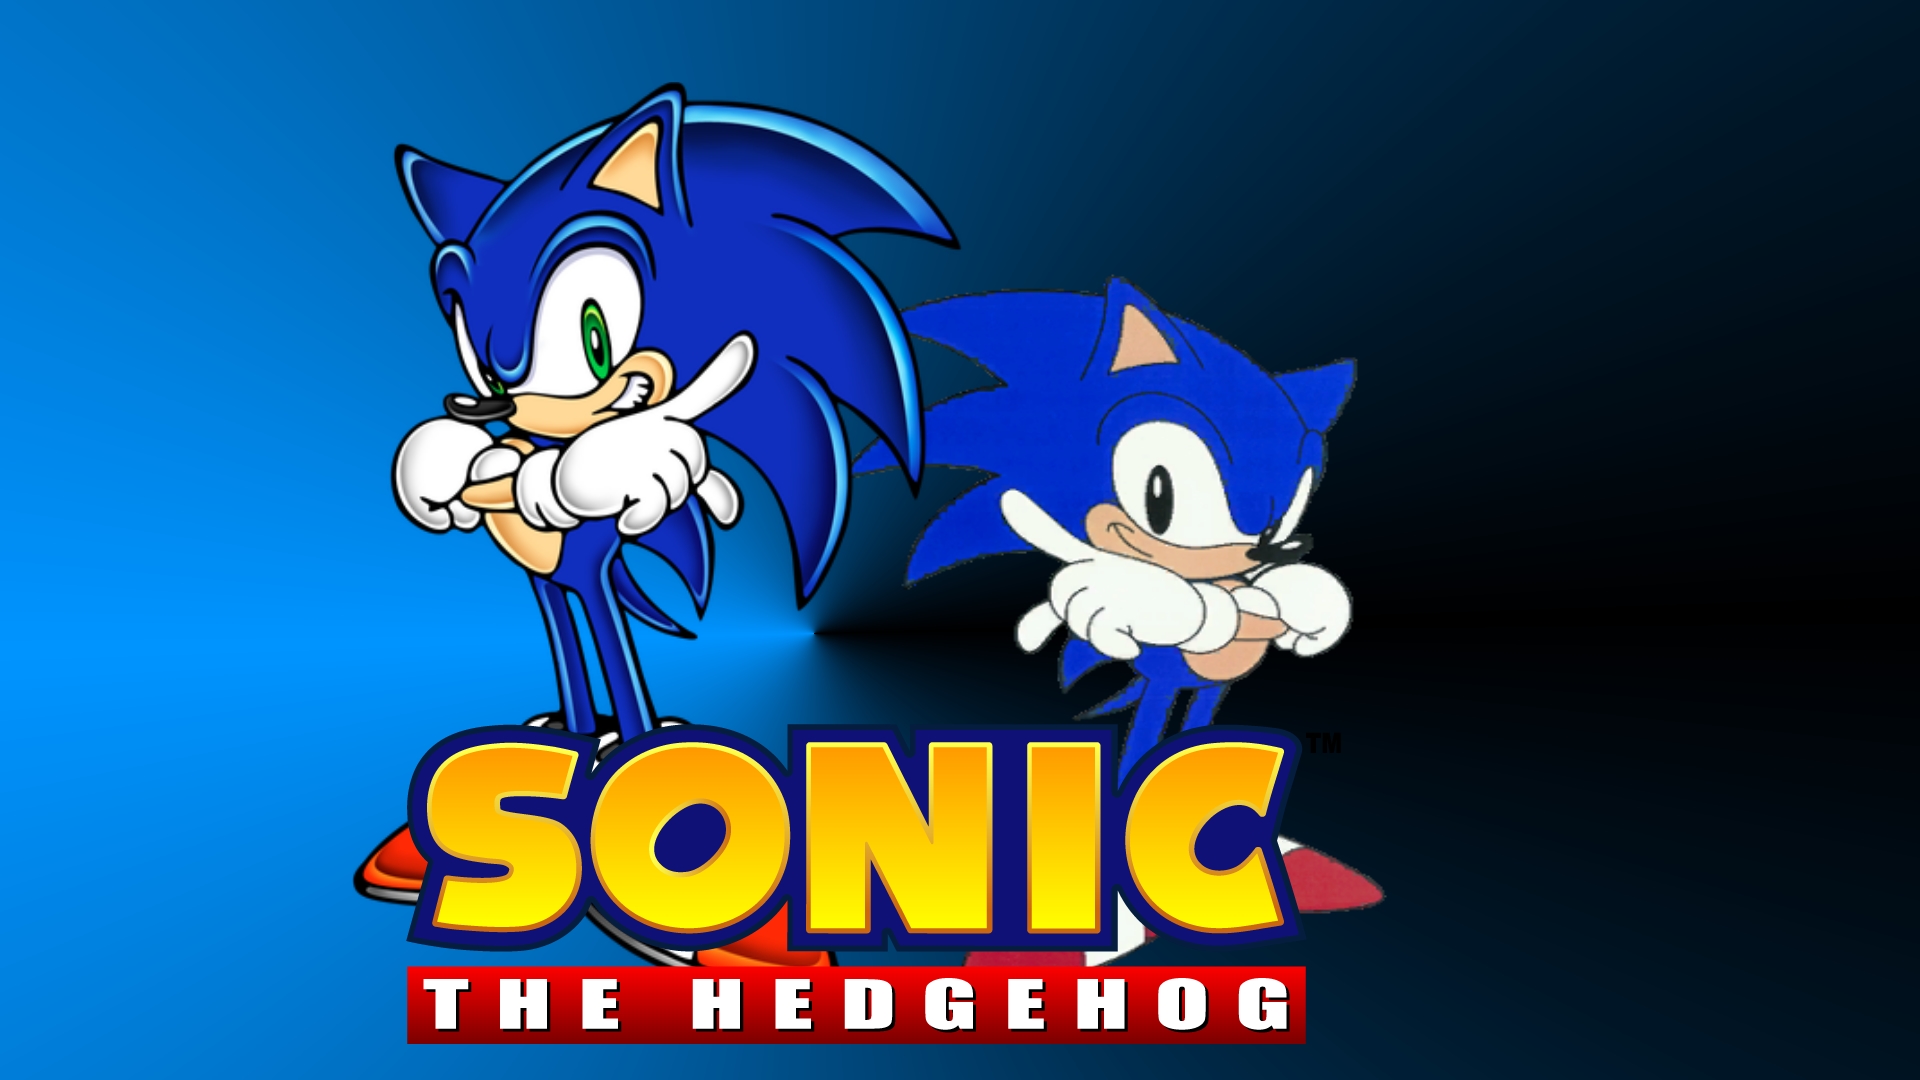 Sonic the hedgehog wallpaper by BlueSpeed360 on